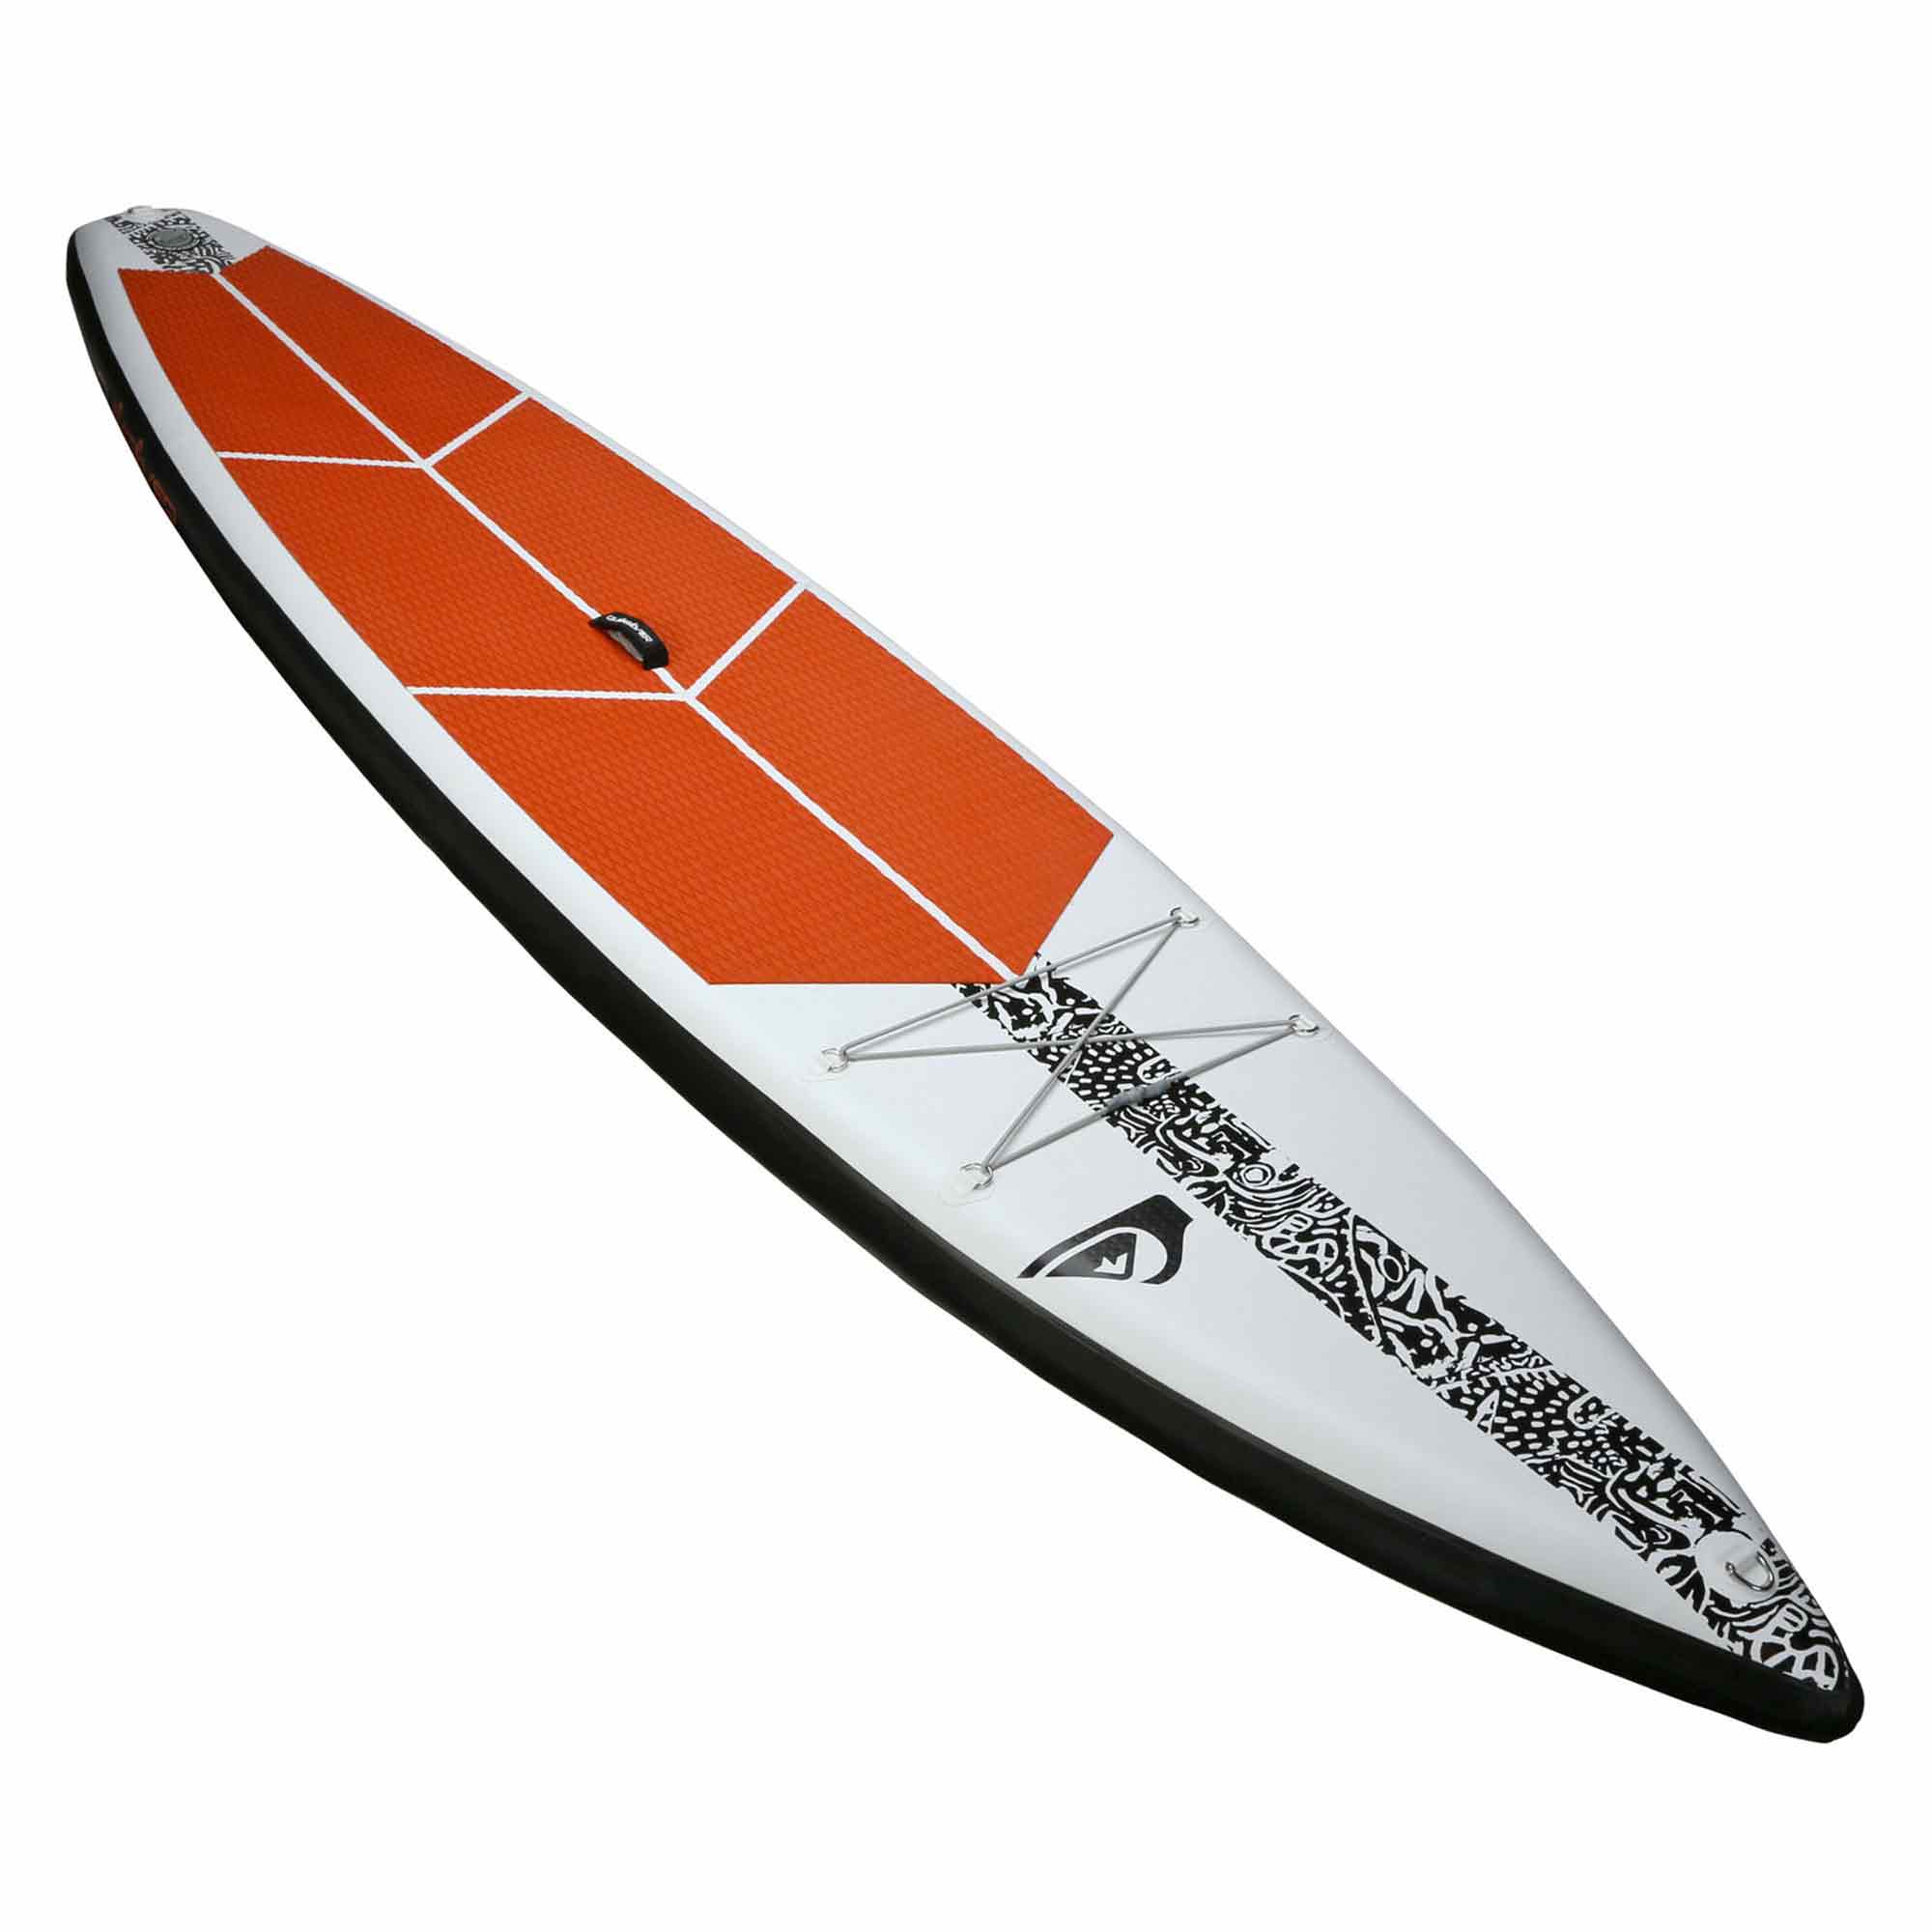 Quiksilver Makiki iSUP Inflatable Stand Up Paddle Board 12ft6in